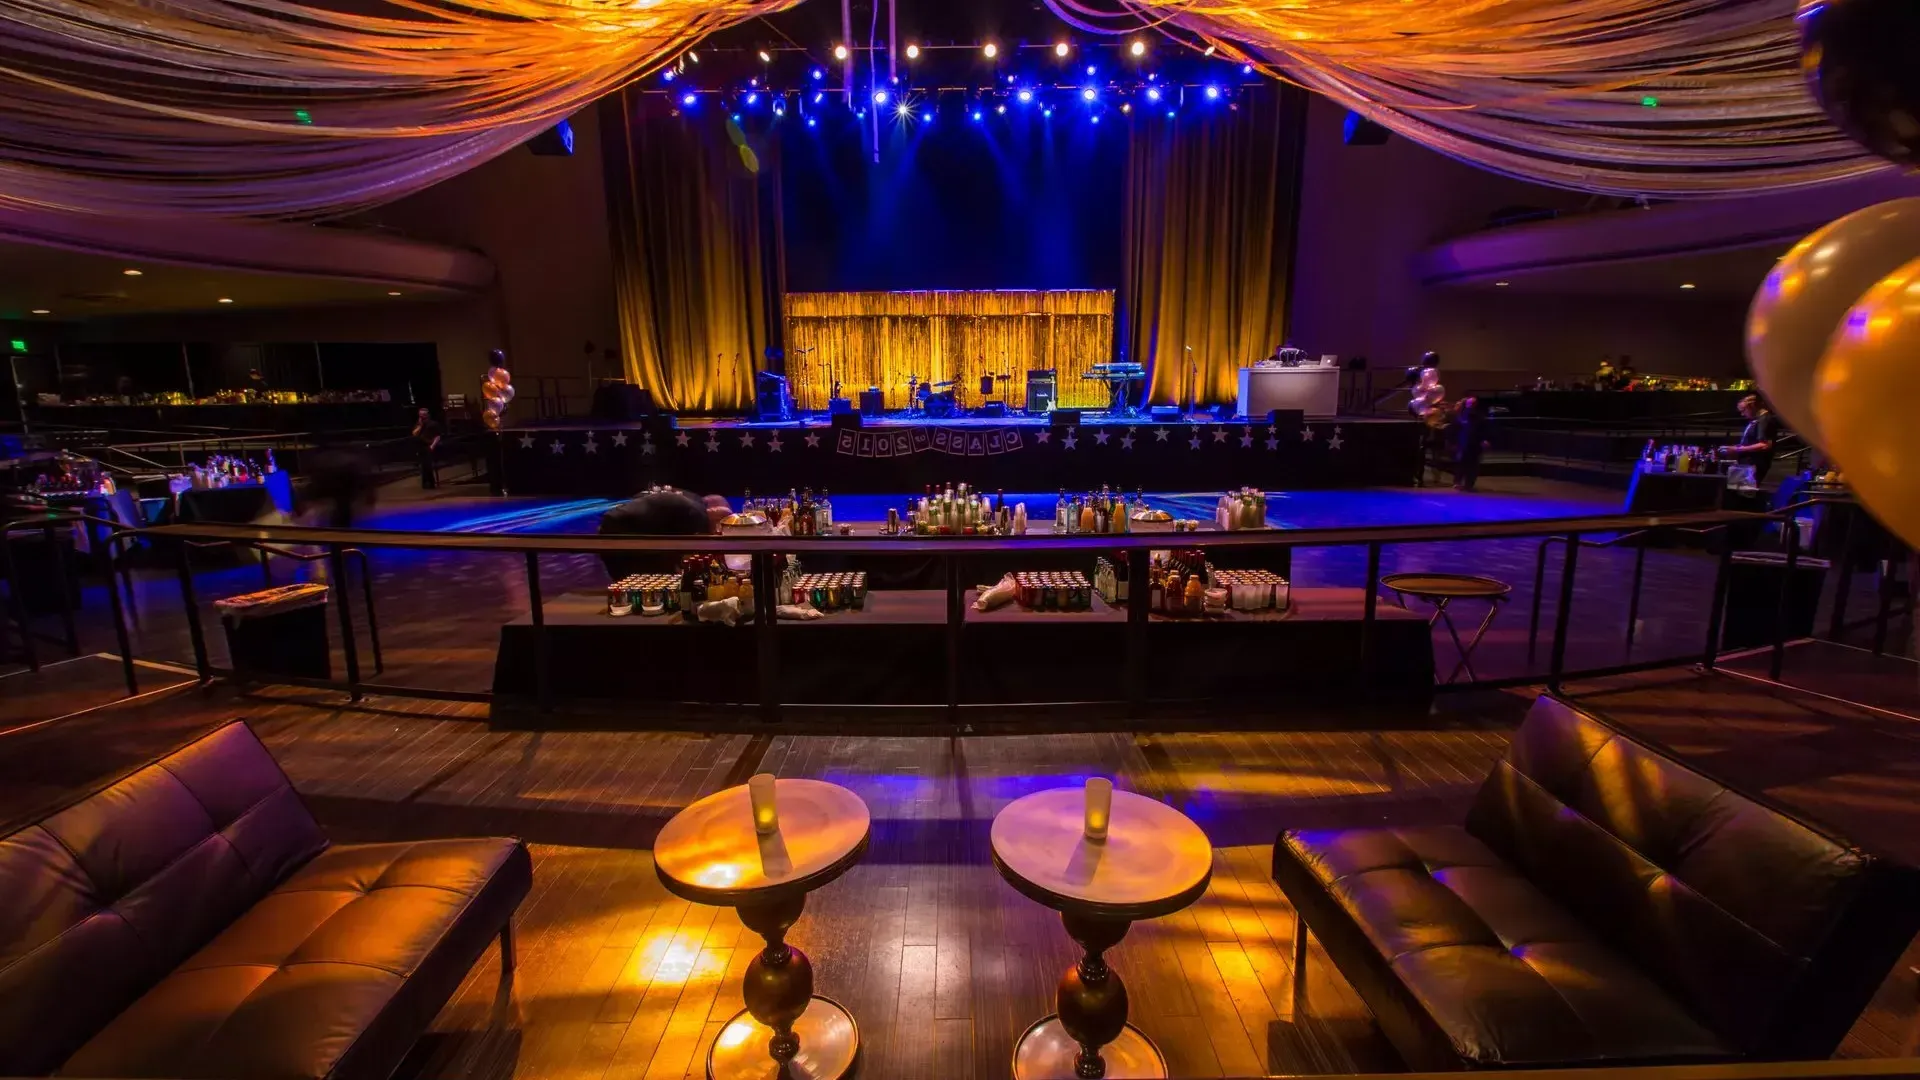 Events at the Masonic in San Francisco